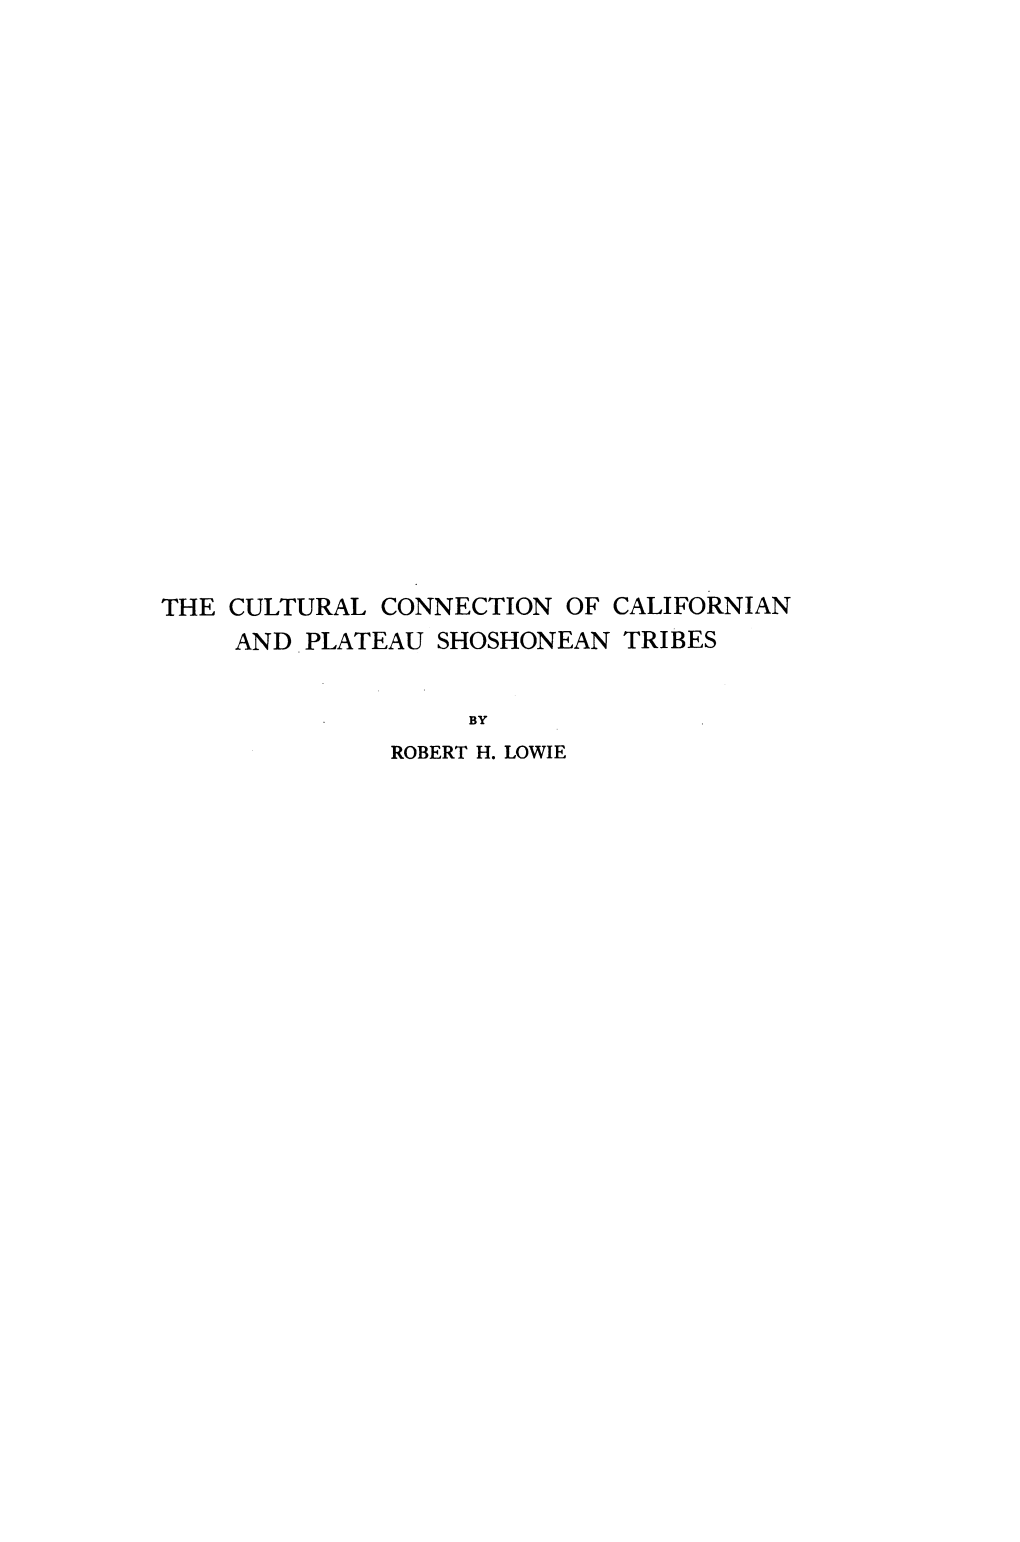 The Cultural Connection of Californian and Plateau Shoshonean Tribes